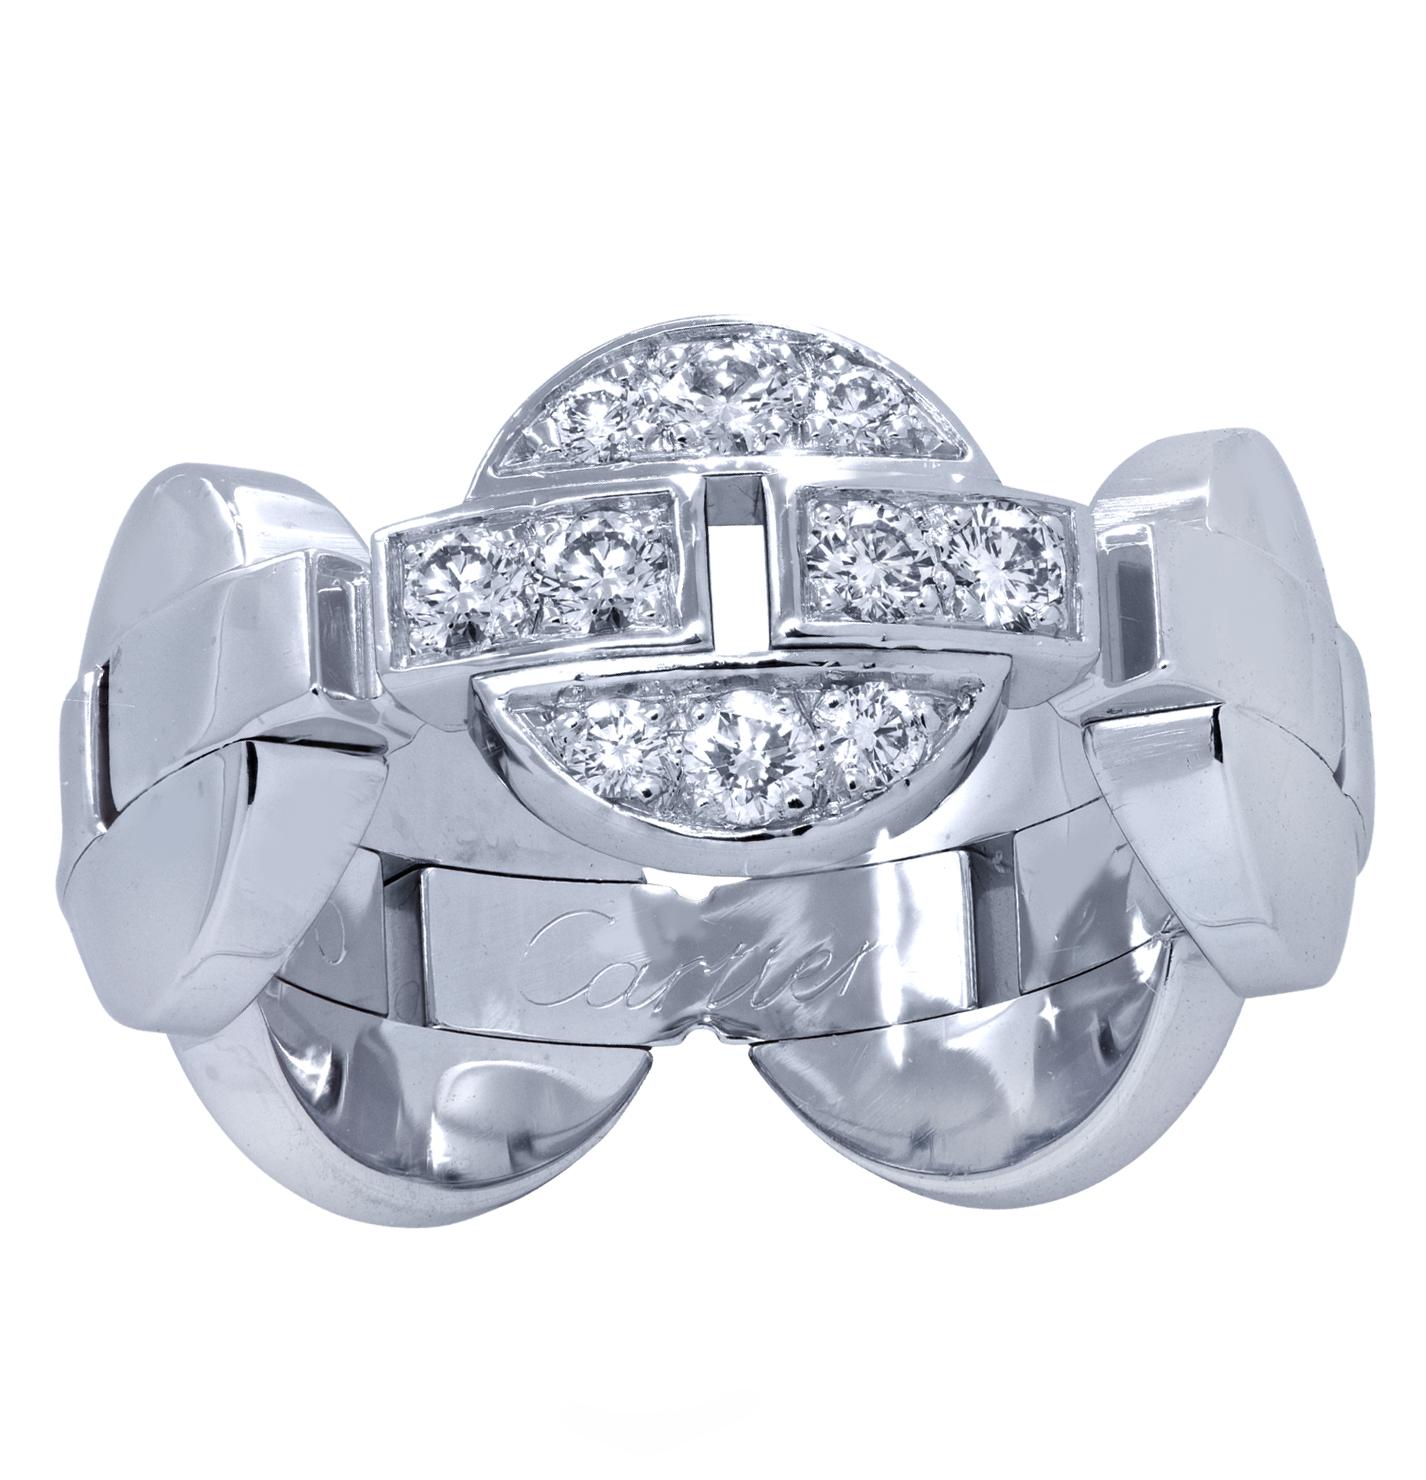 Cartier Himalia ring crafted in 18 carat white gold, featuring 10 round brilliant cut diamonds, weighing approximately 0.35 carats total, E color, VS clarity. Five circular motifs, one of which is diamond encrusted, link together to create this